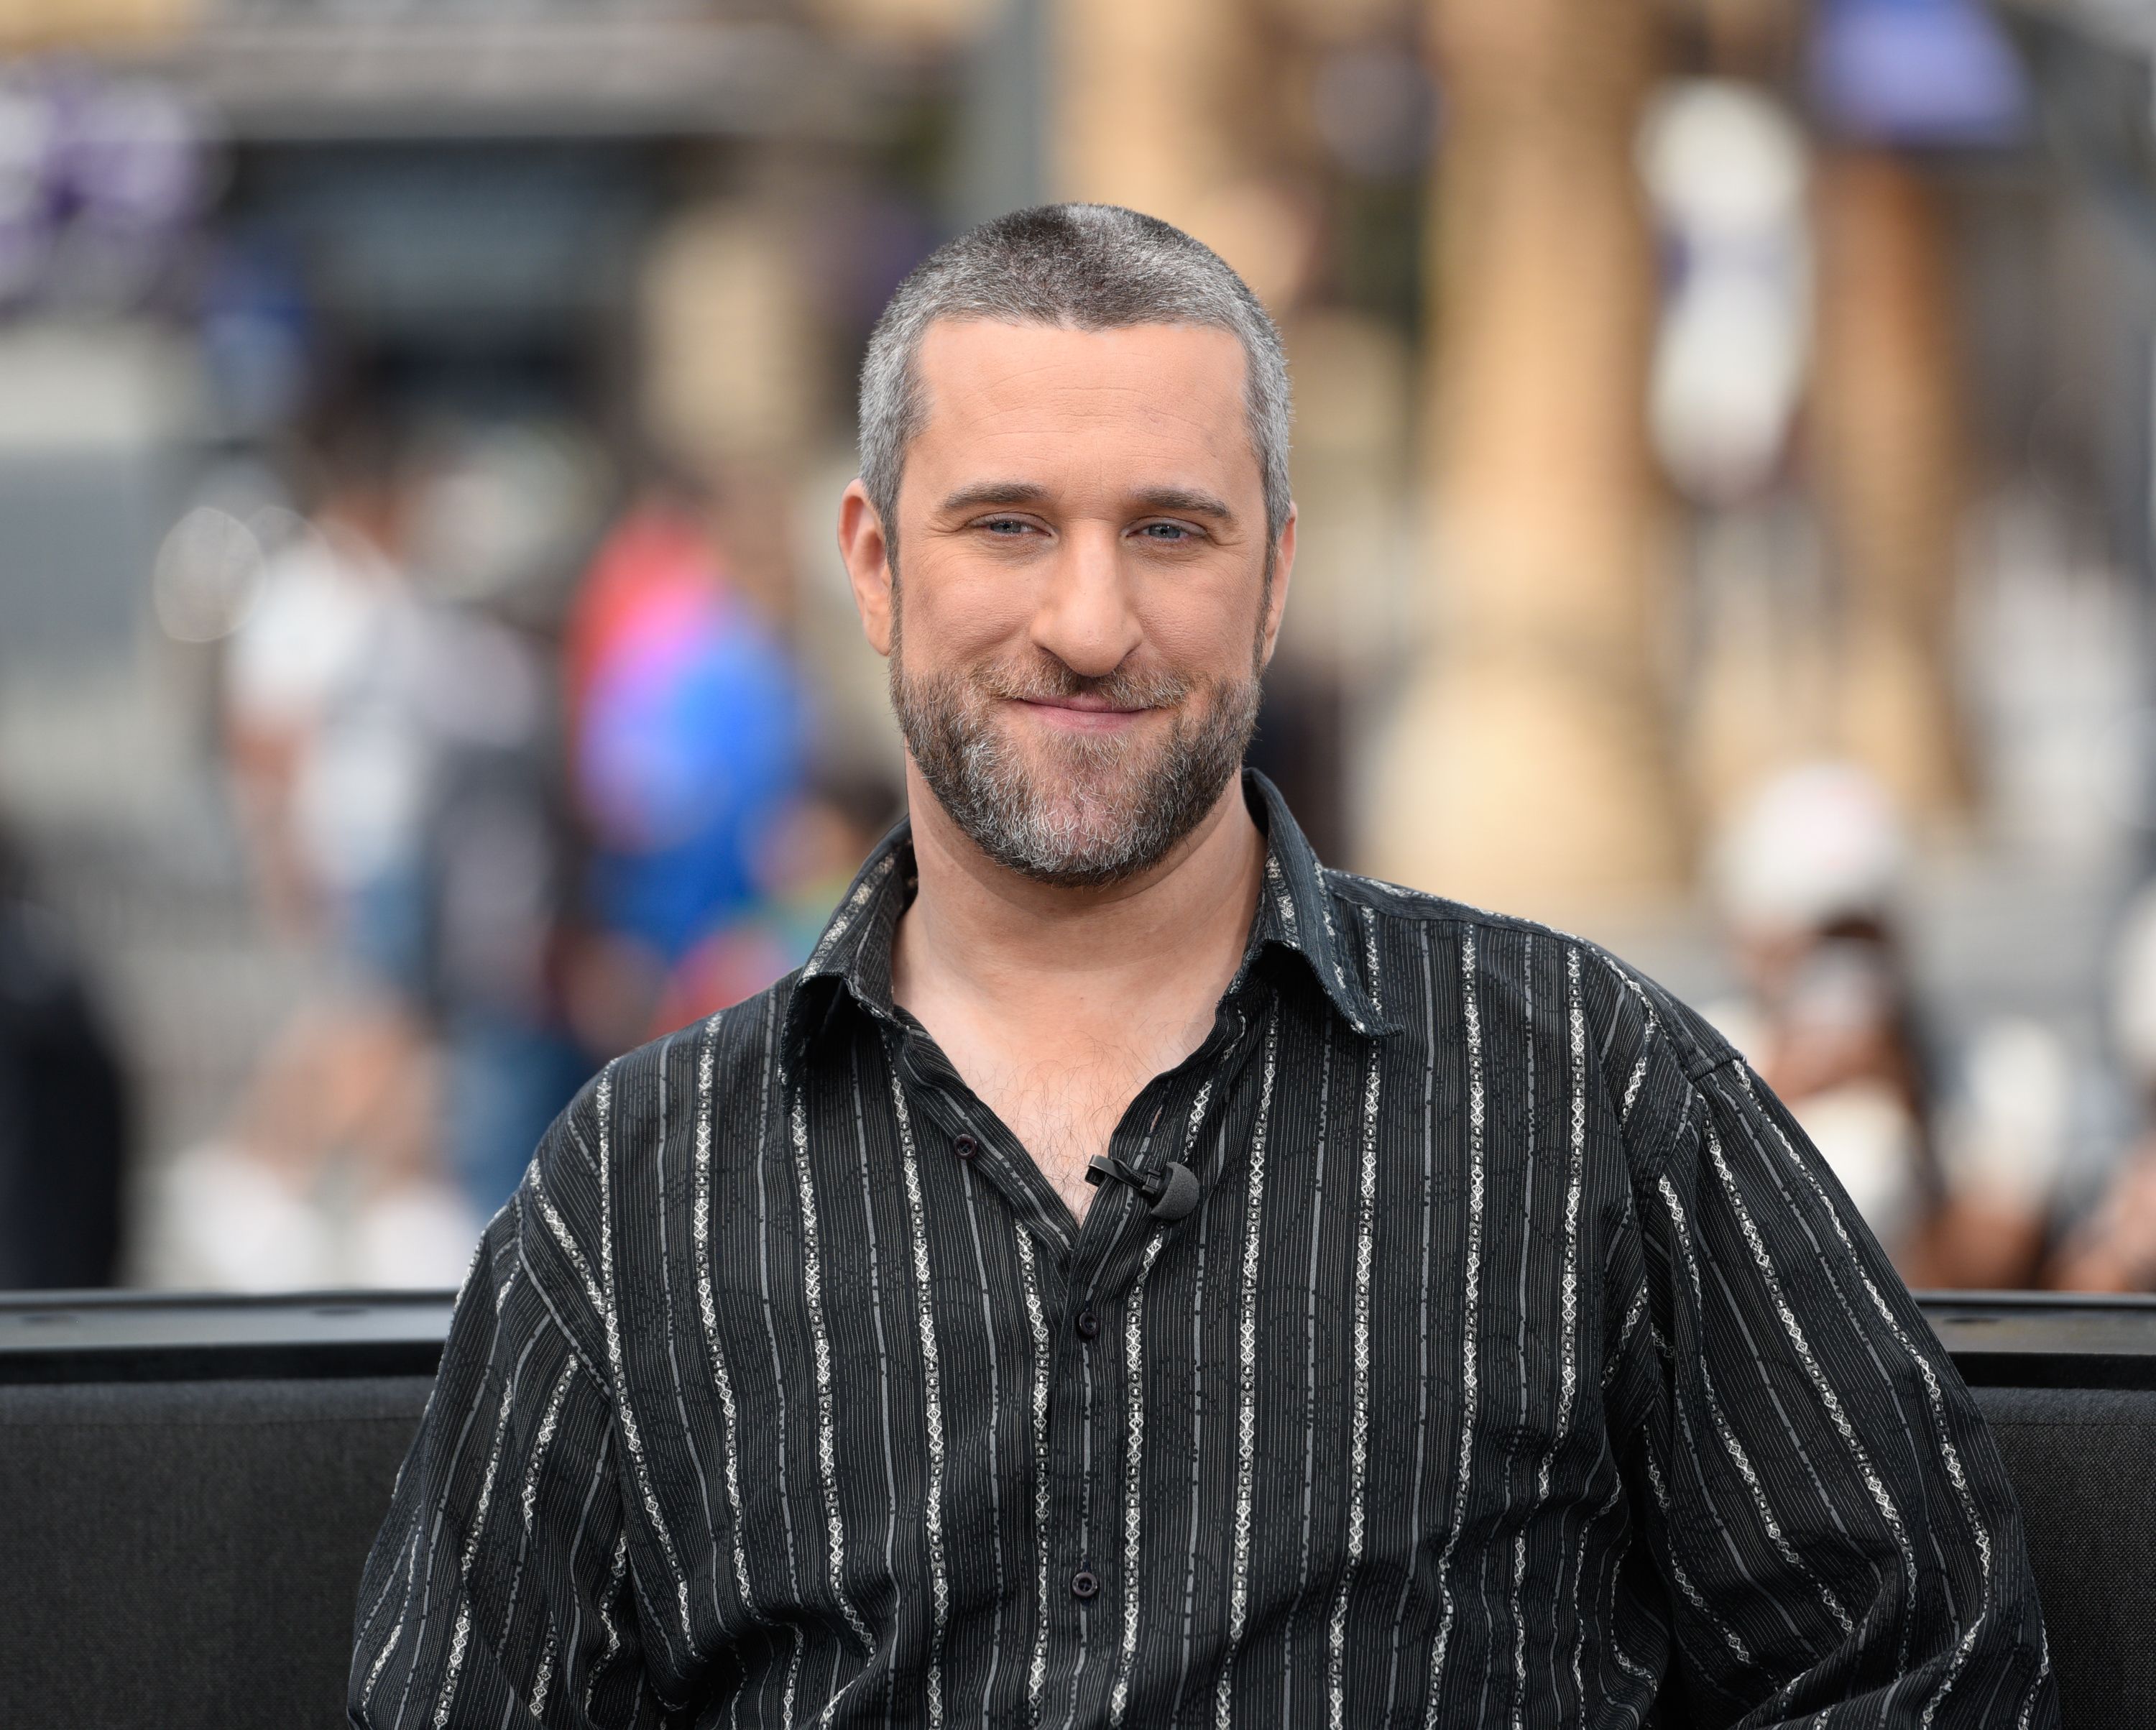 Dustin Diamond at Universal Studios Hollywood visiting "Extra" on May 16, 2016 | Getty Images